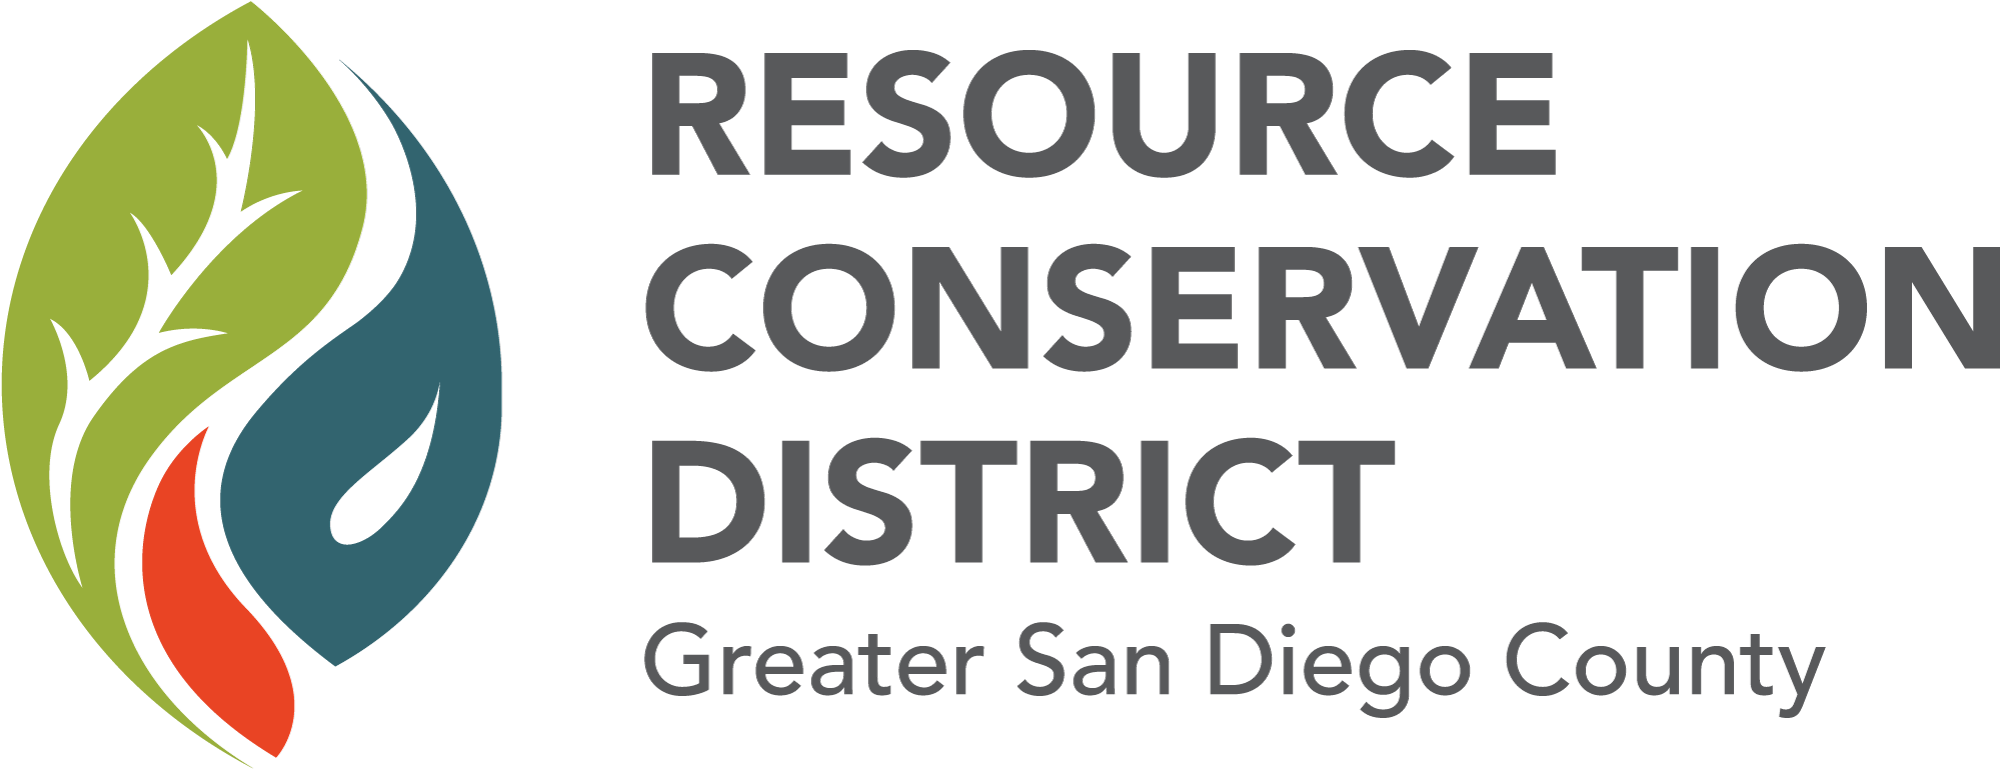 Resource Conservation District Greater San Diego County Logo